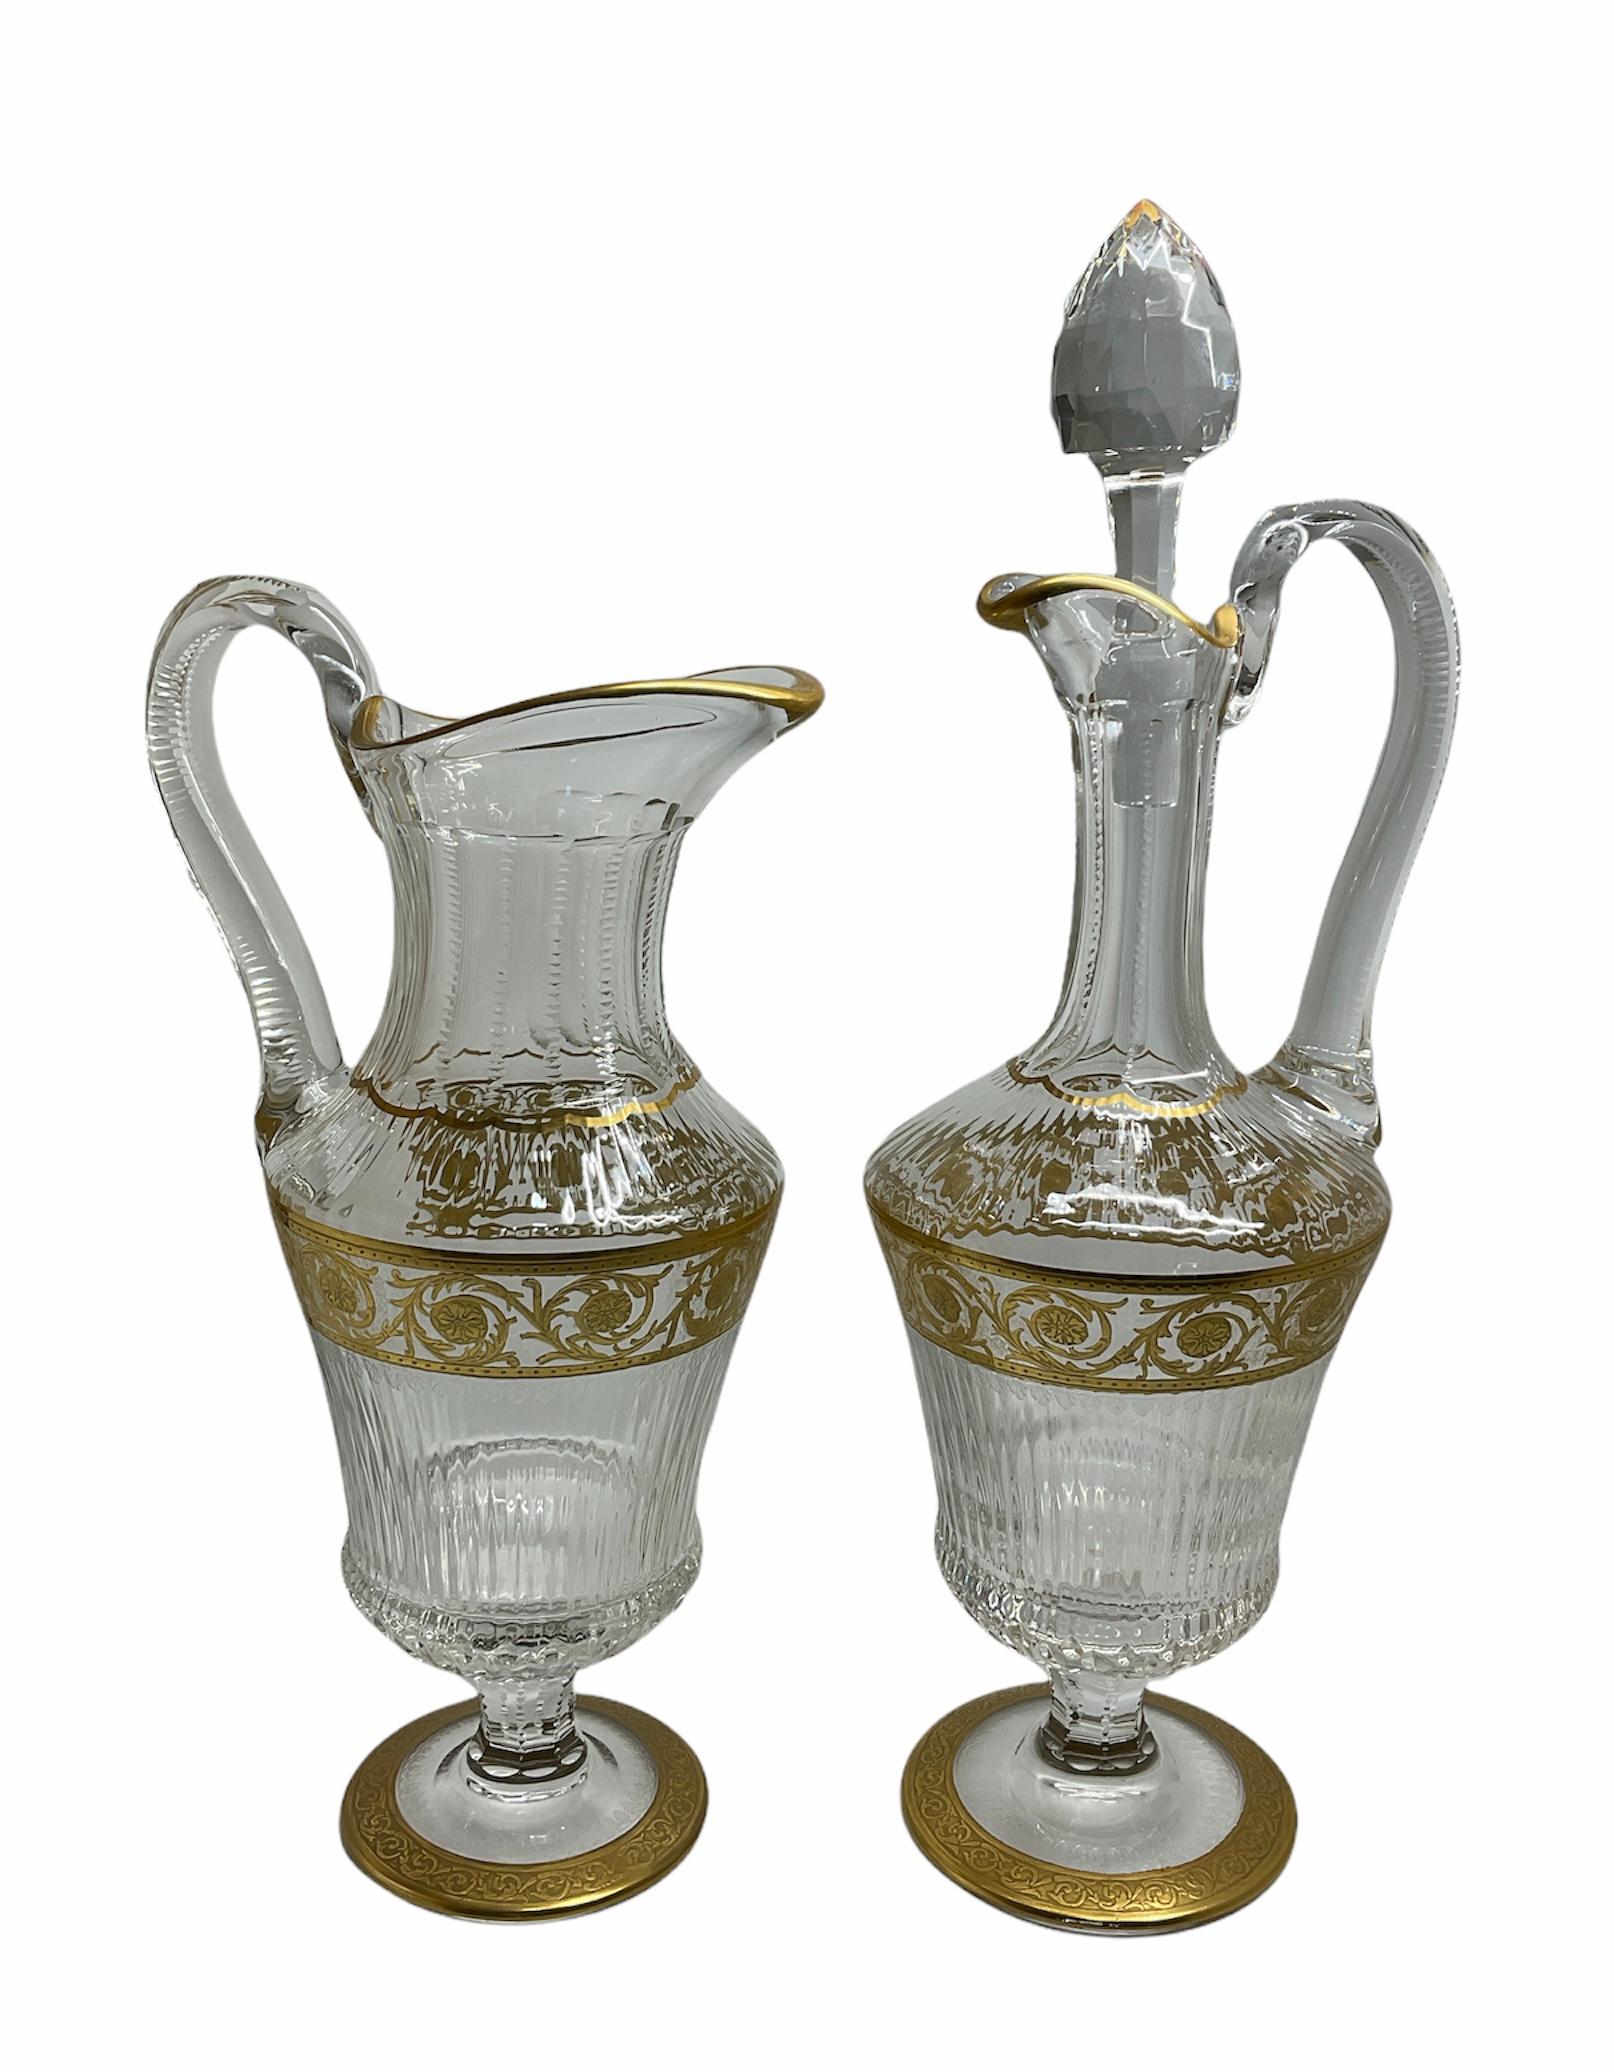 20th Century Elegant Saint Louis Crystal Gold Thistle Pattern Set of a Jug and Decanter